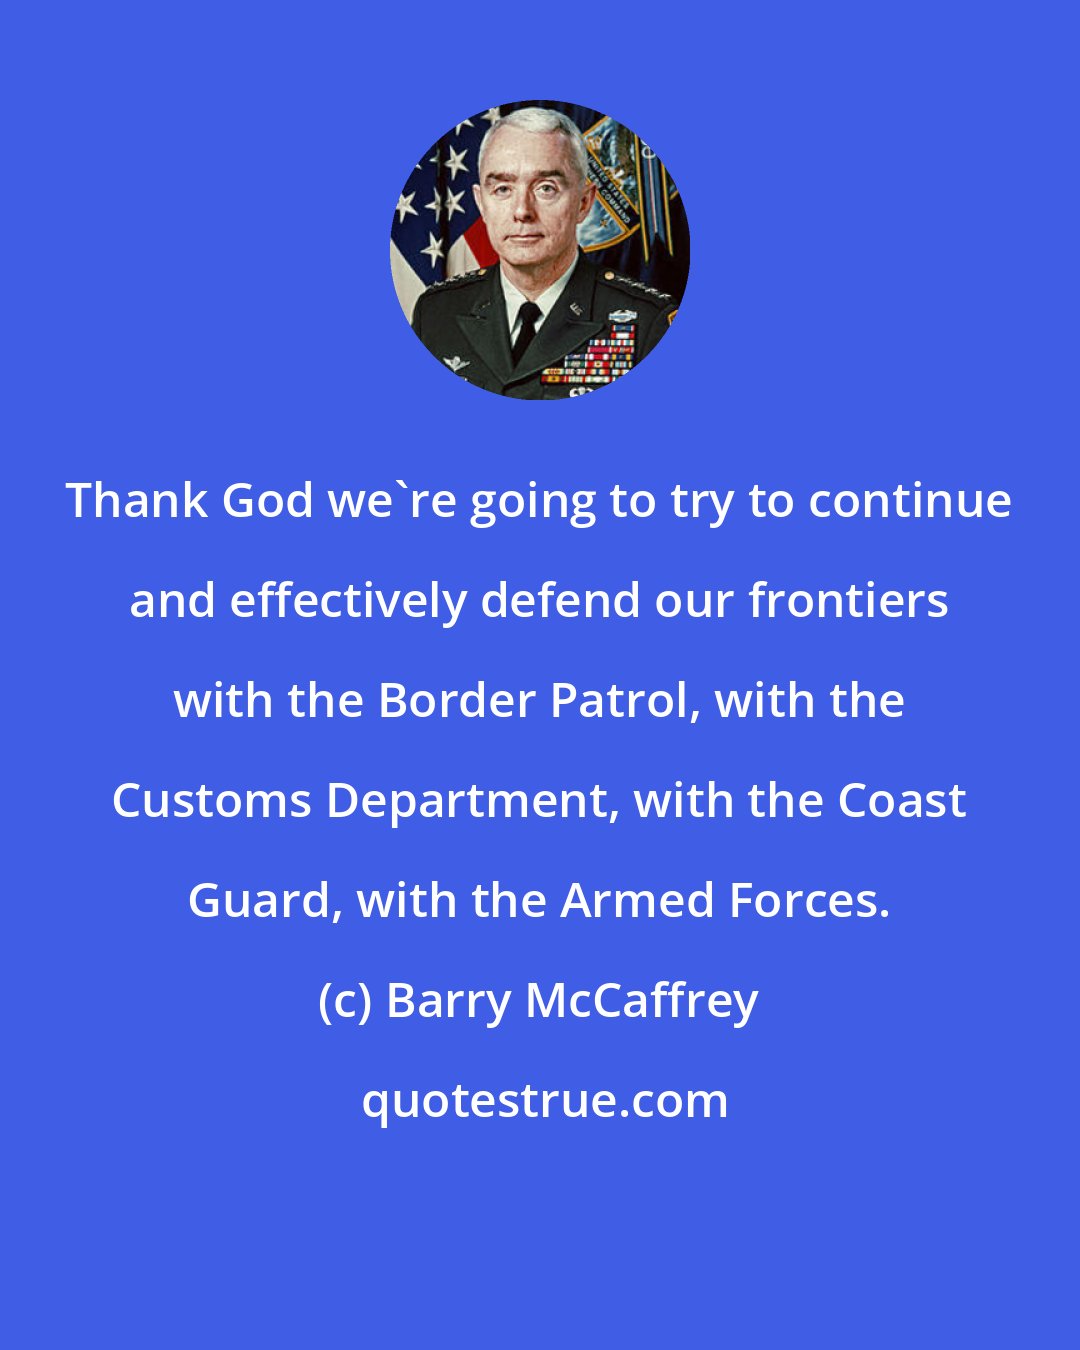 Barry McCaffrey: Thank God we're going to try to continue and effectively defend our frontiers with the Border Patrol, with the Customs Department, with the Coast Guard, with the Armed Forces.